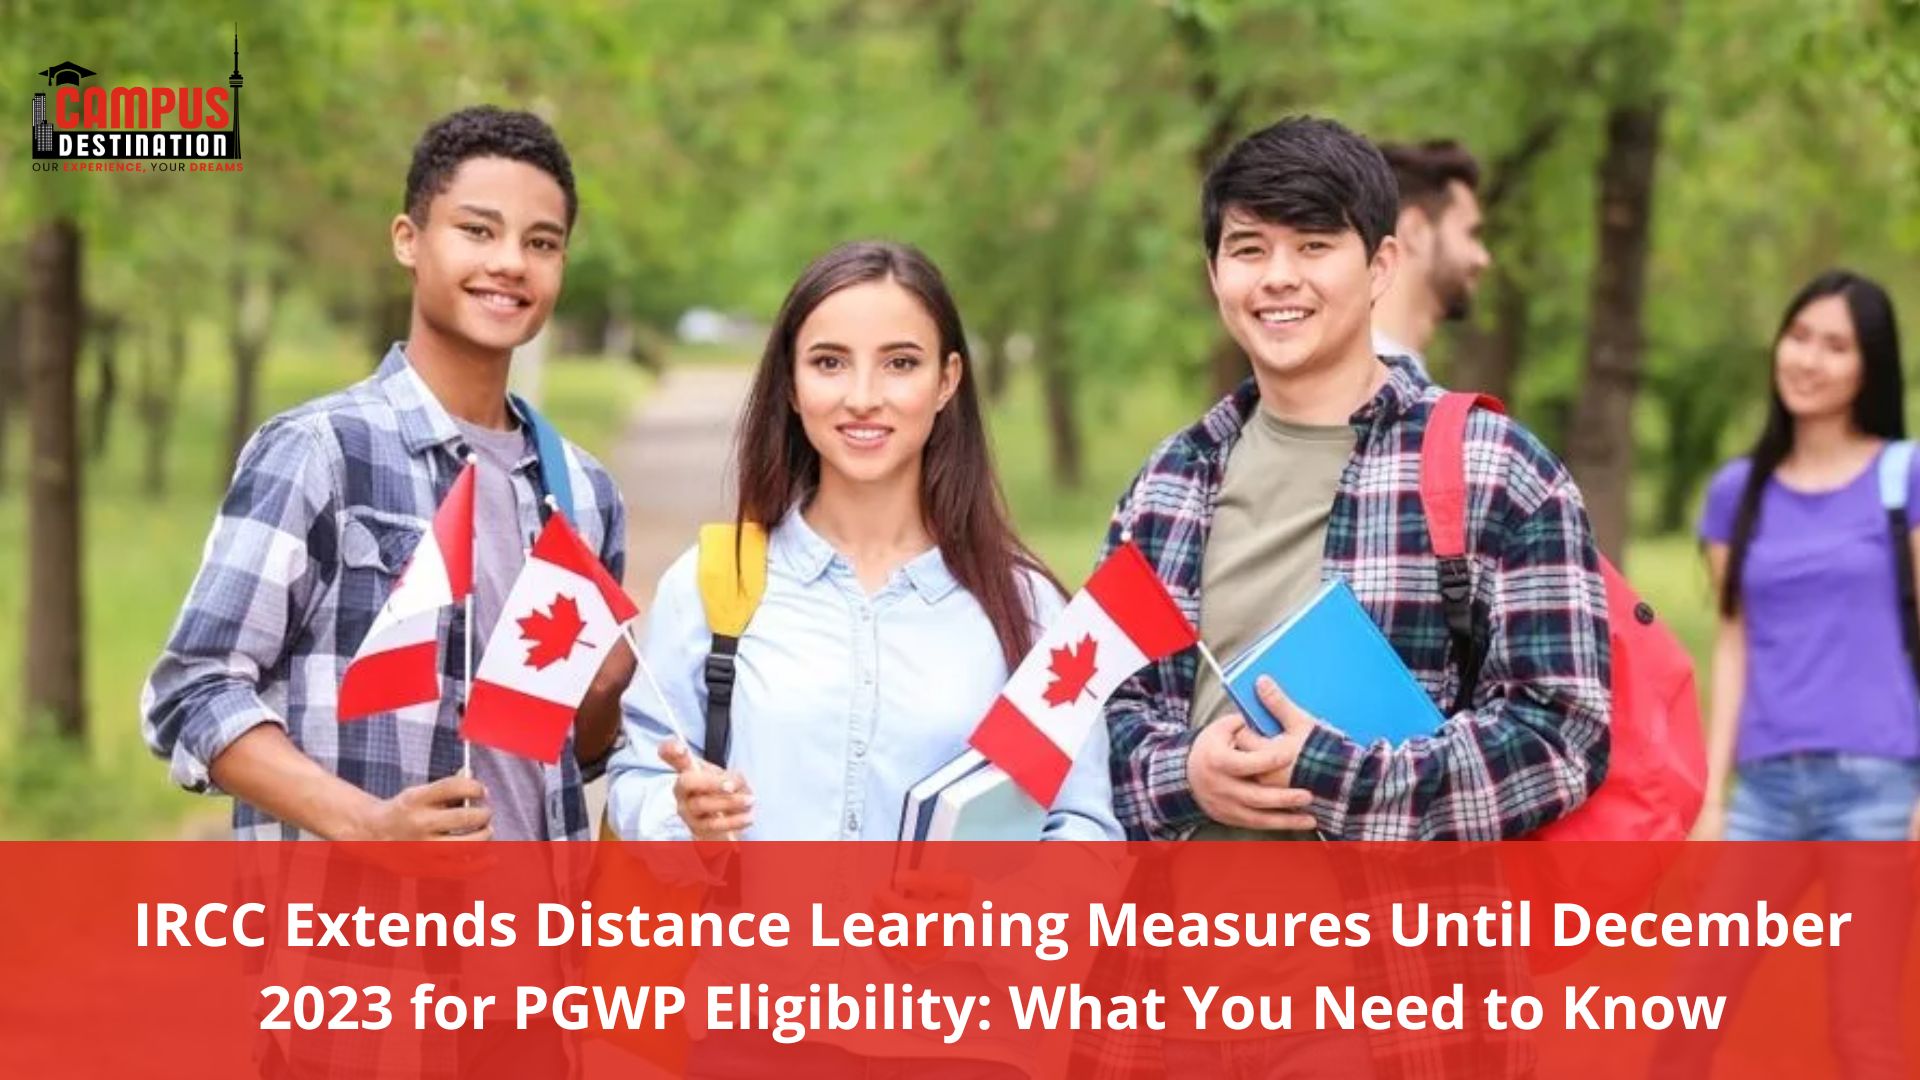 You are currently viewing IRCC Extends Distance Learning Measures Until December 2023 for PGWP Eligibility: What You Need to Know